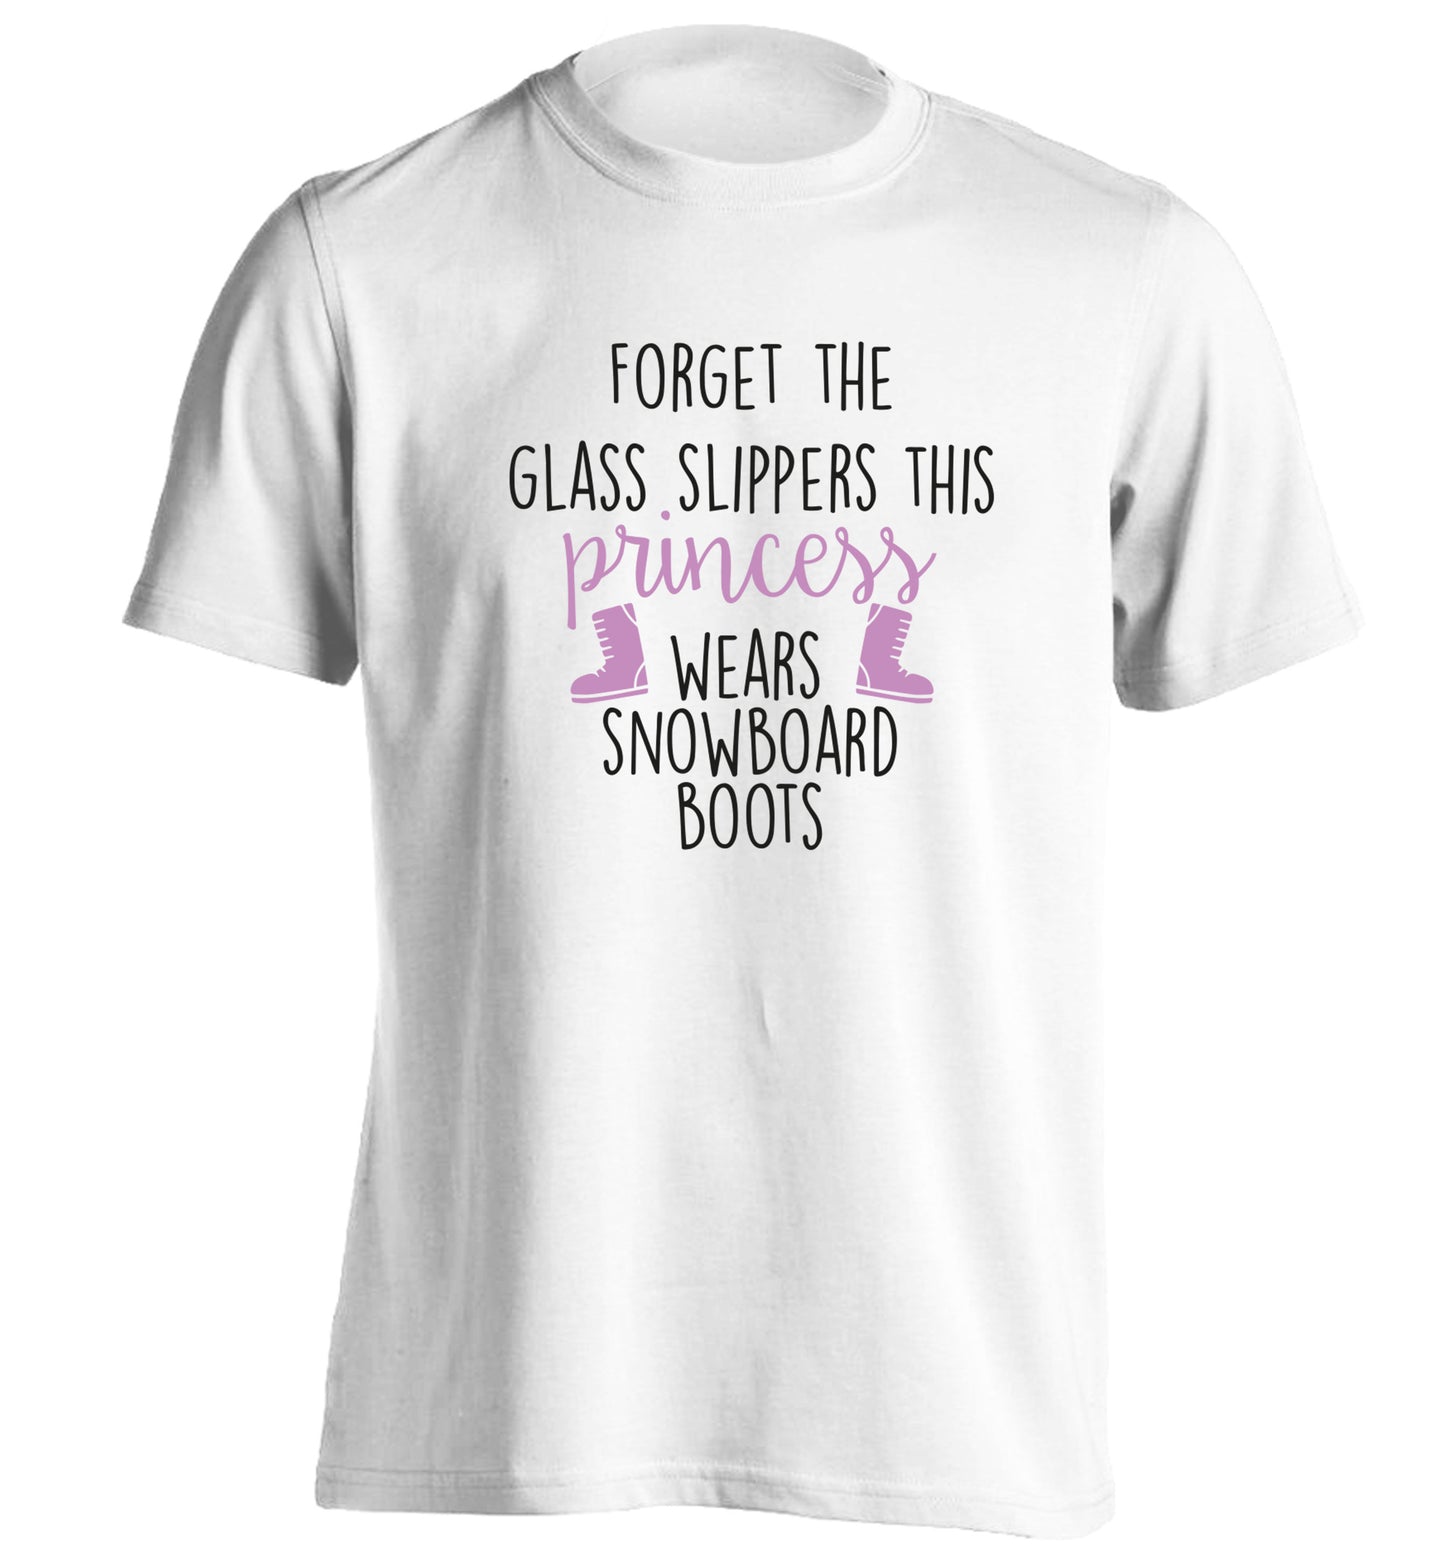 Forget the glass slippers this princess wears snowboard boots adults unisex white Tshirt 2XL